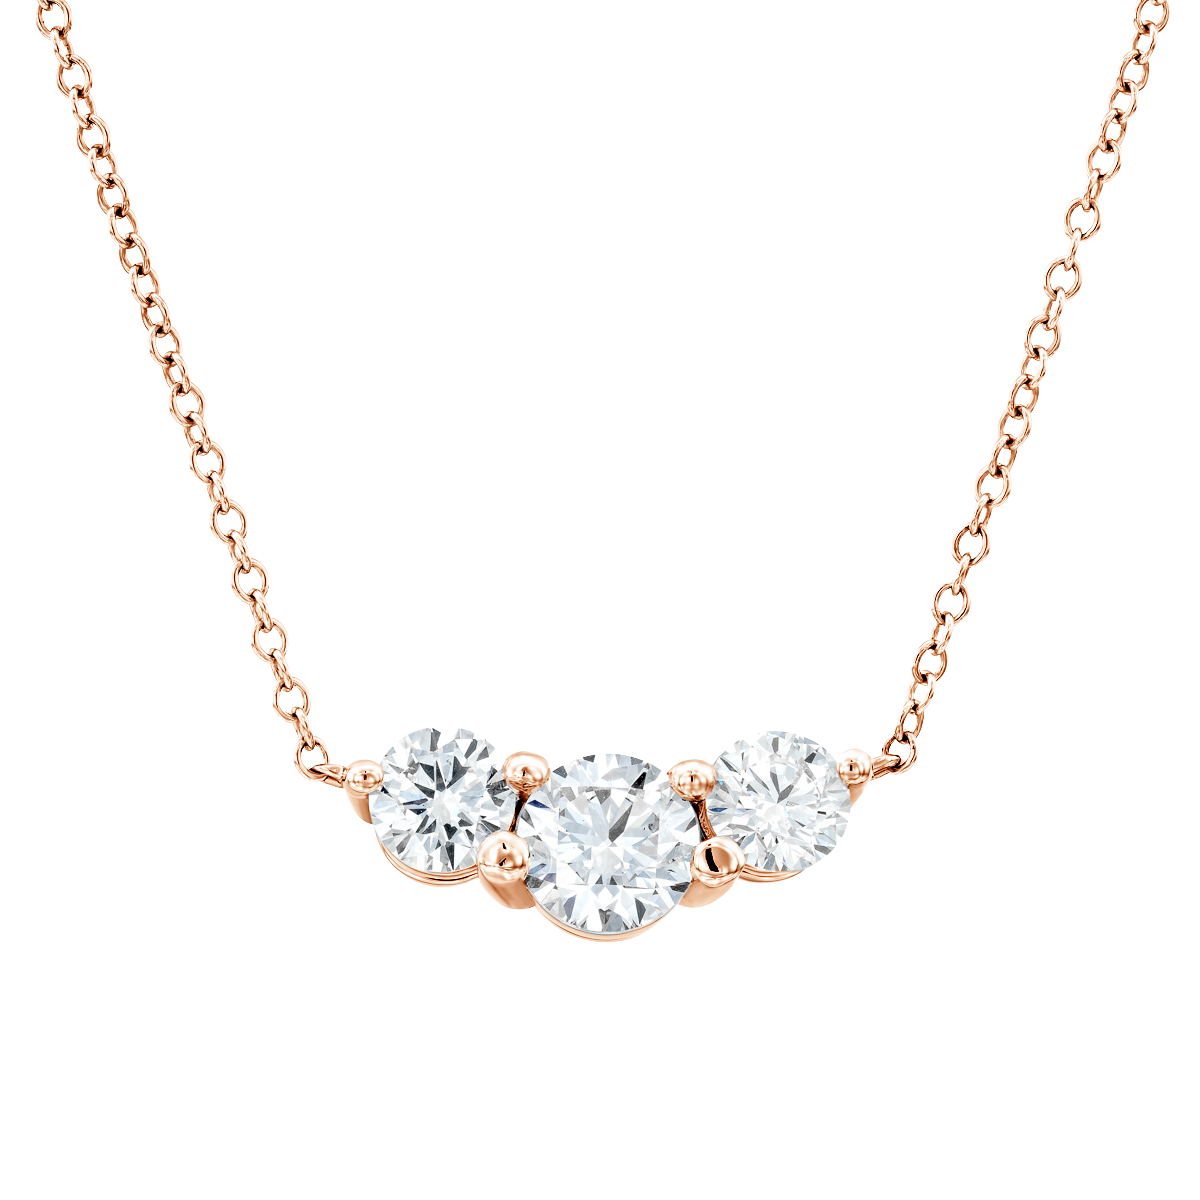 235-DN630 - 18K Gold '3 In 1' Diamond Necklace With Color Stones & South  Sea Pearls | Diamond necklace designs, Cross jewelry necklace, Diamond  wedding jewelry